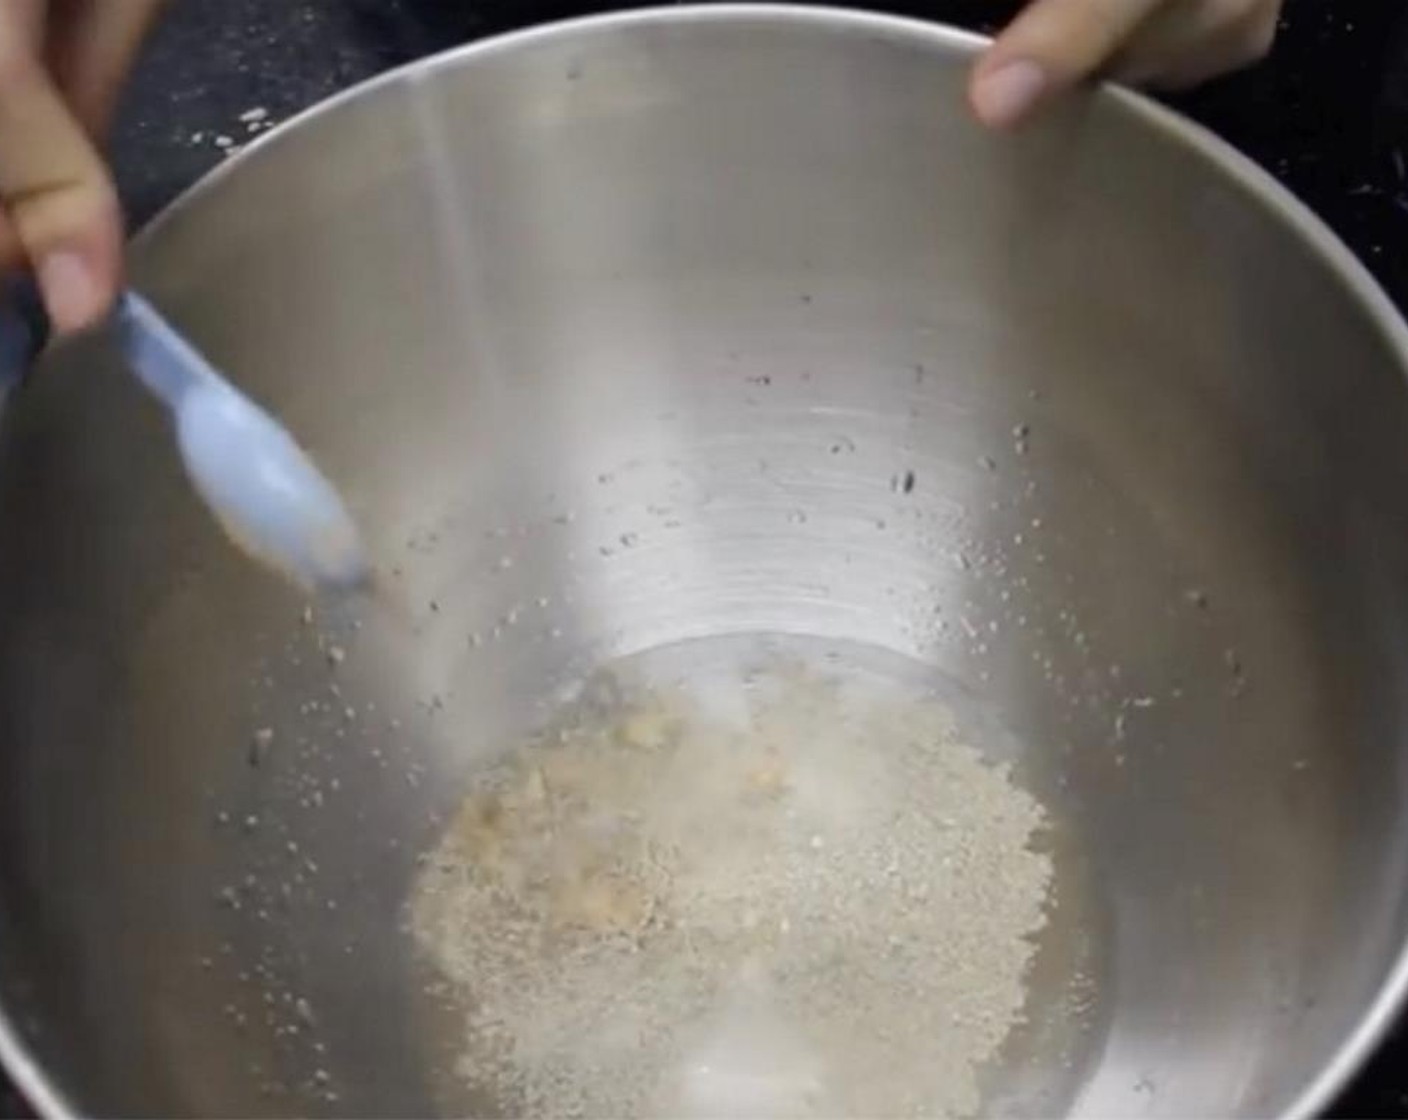 step 1 In your mixing bowl, add in Water (1 cup), Granulated Sugar (1 tsp) and Instant Dry Yeast (1/2 Tbsp). Let it sit for 10 minutes until foamy.